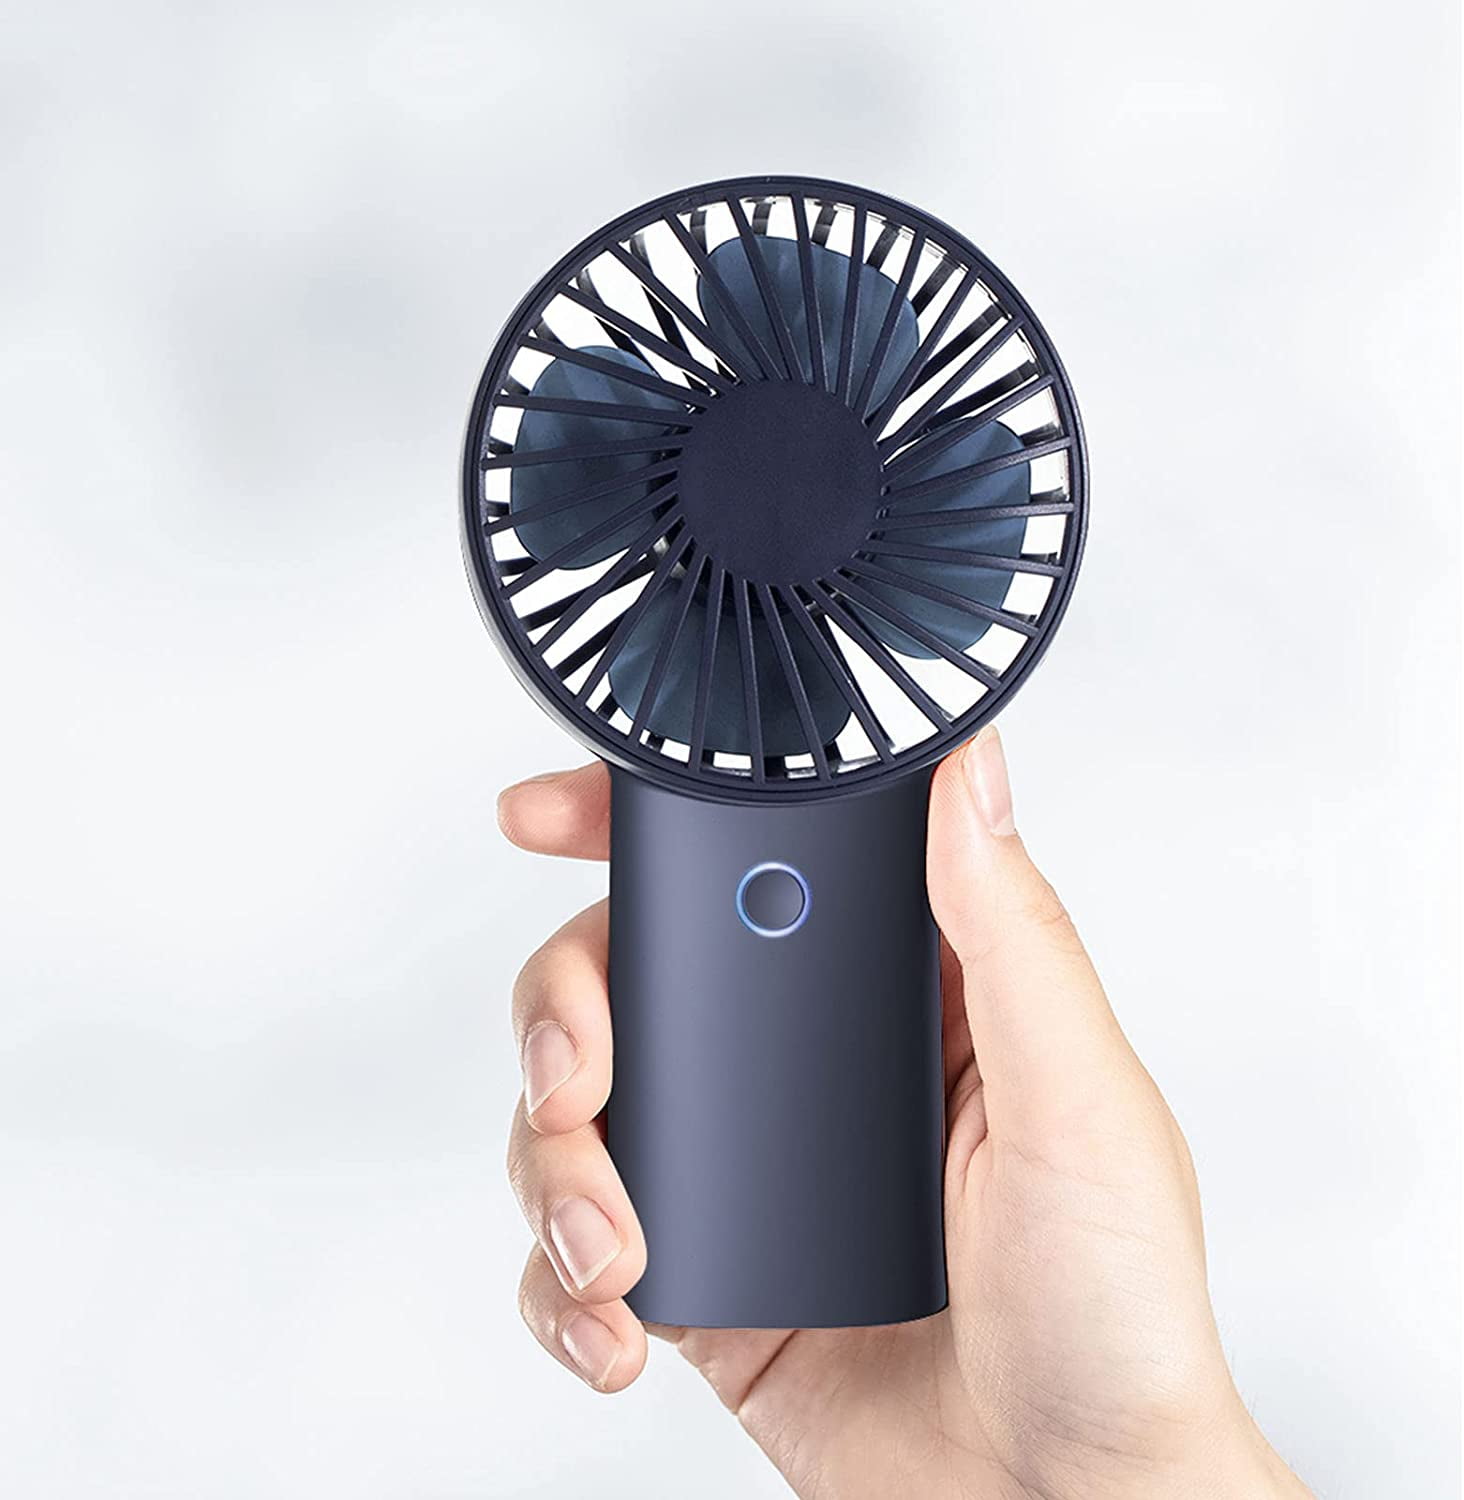 Mini Portable Fan Handheld Mini Fan Battery Operated Small Personal Portable Fan Speed Adjustable USB Rechargeable Fan Cute Design 1200 MAh Battery For Travel Camping 2 Speeds 3 Colors USB Fan for Tra